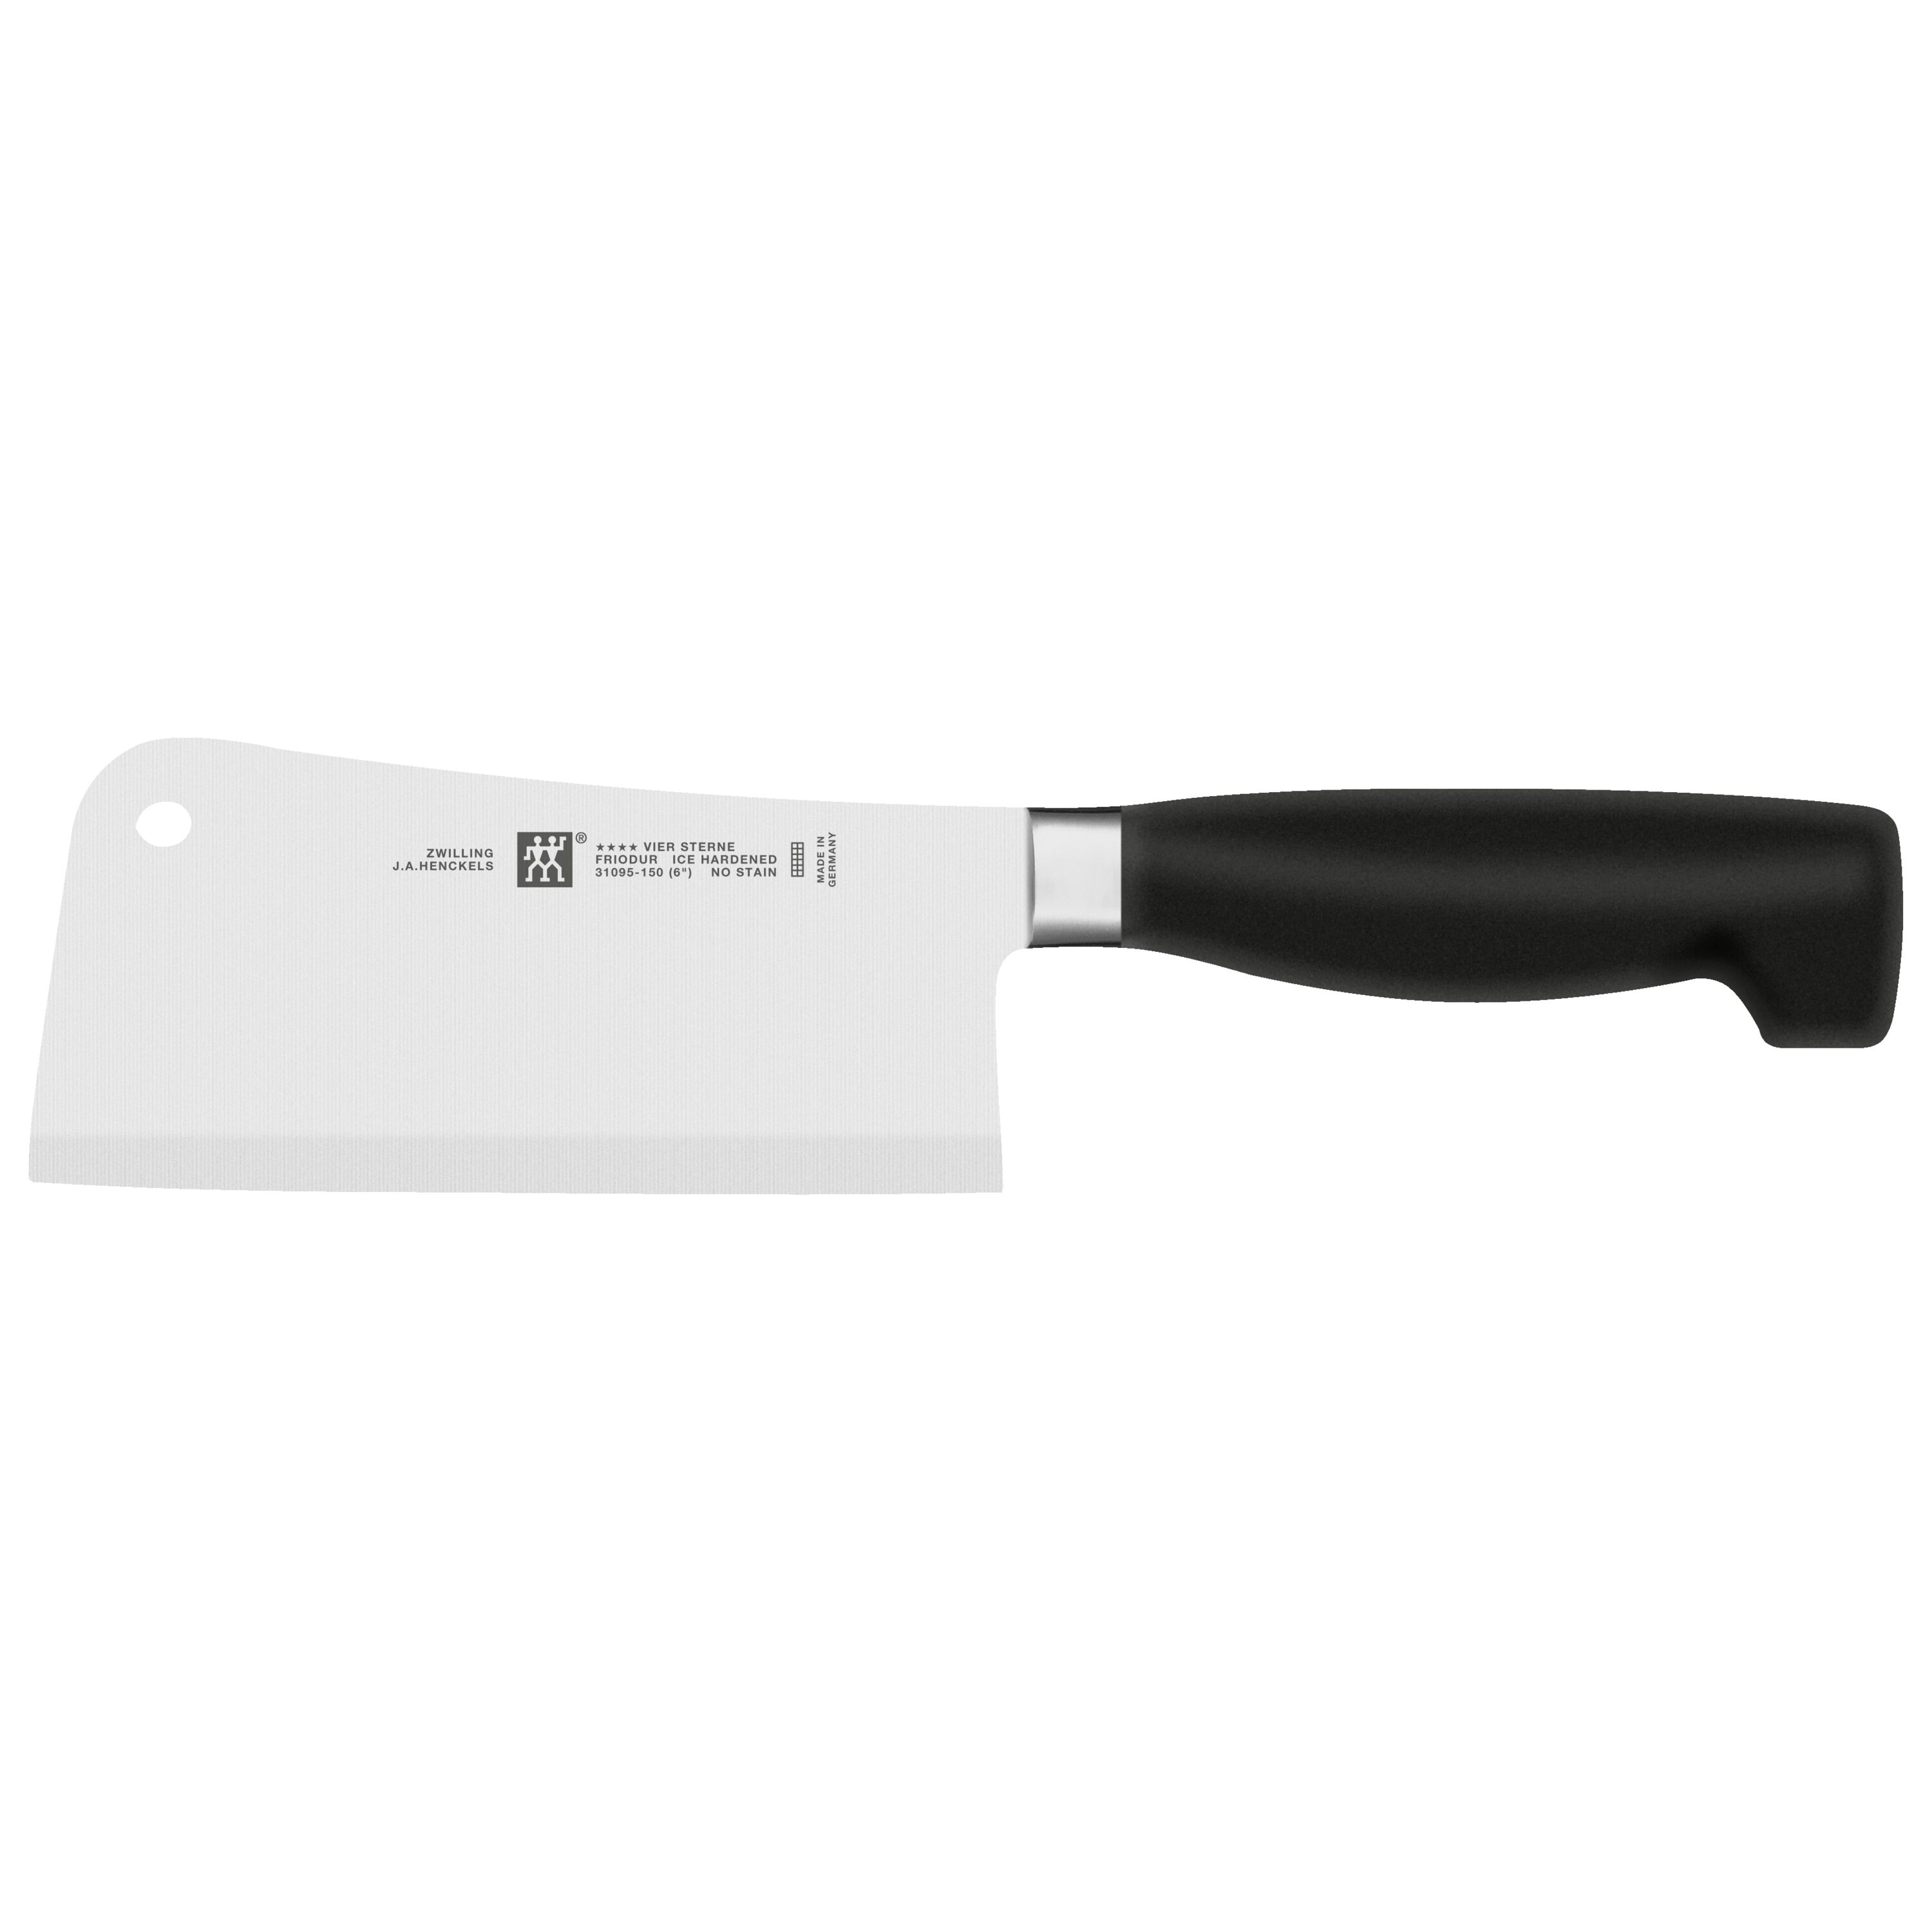 Meat Cleaver, 10 inch Black Meat Cleaver Boning Knife, Chef